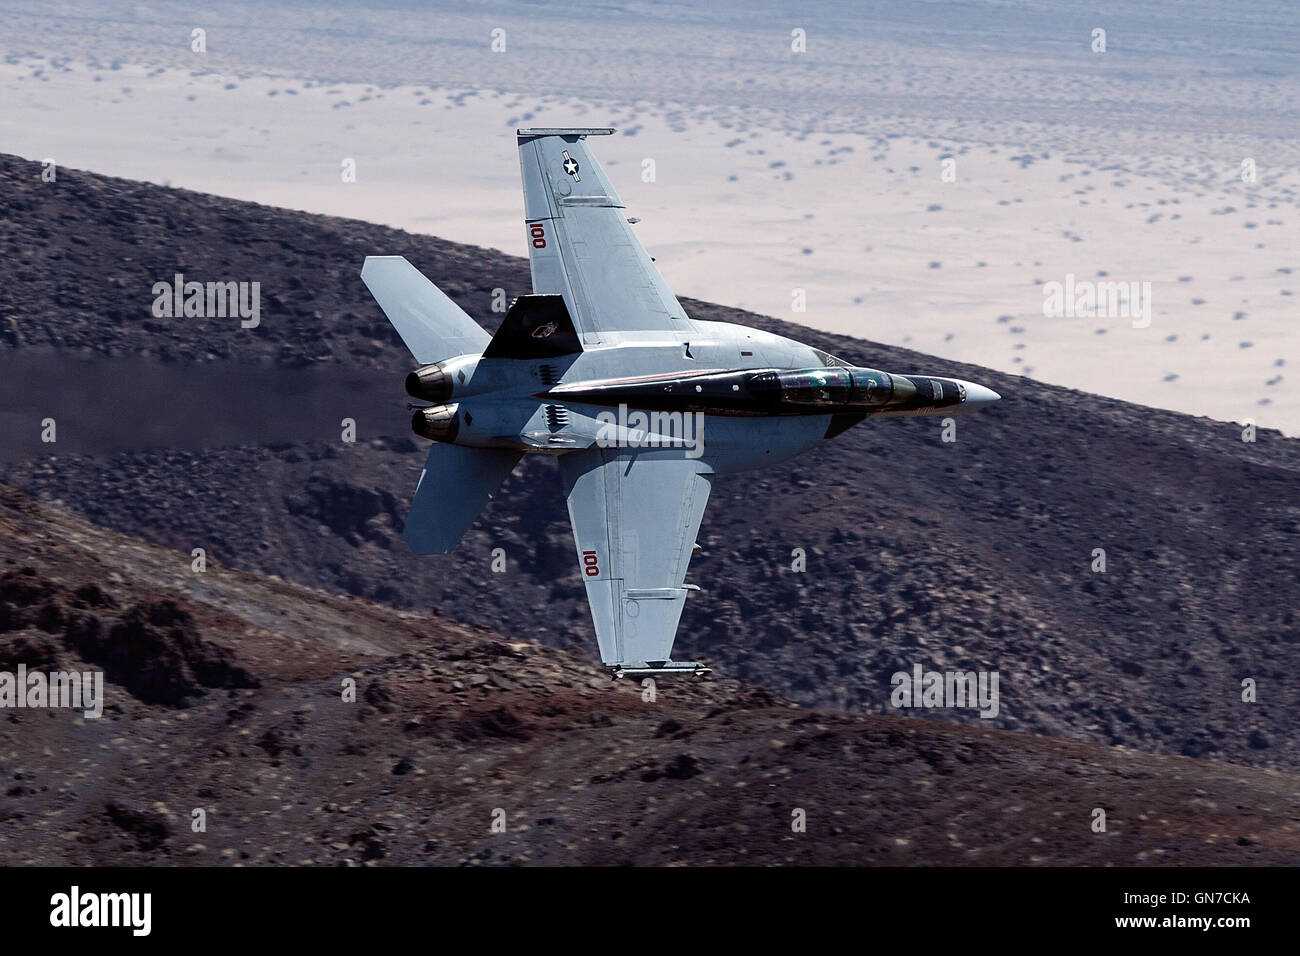 US Navy Boeing F/A-18F Super Hornet NH-100 (SN 166873) from VFA-154 the "Black Knights" flies through the Jedi Transition, R-2508 complex, Star Wars Canyon / Rainbow Canyon, Death Valley National Park, California, United States of America. Stock Photo